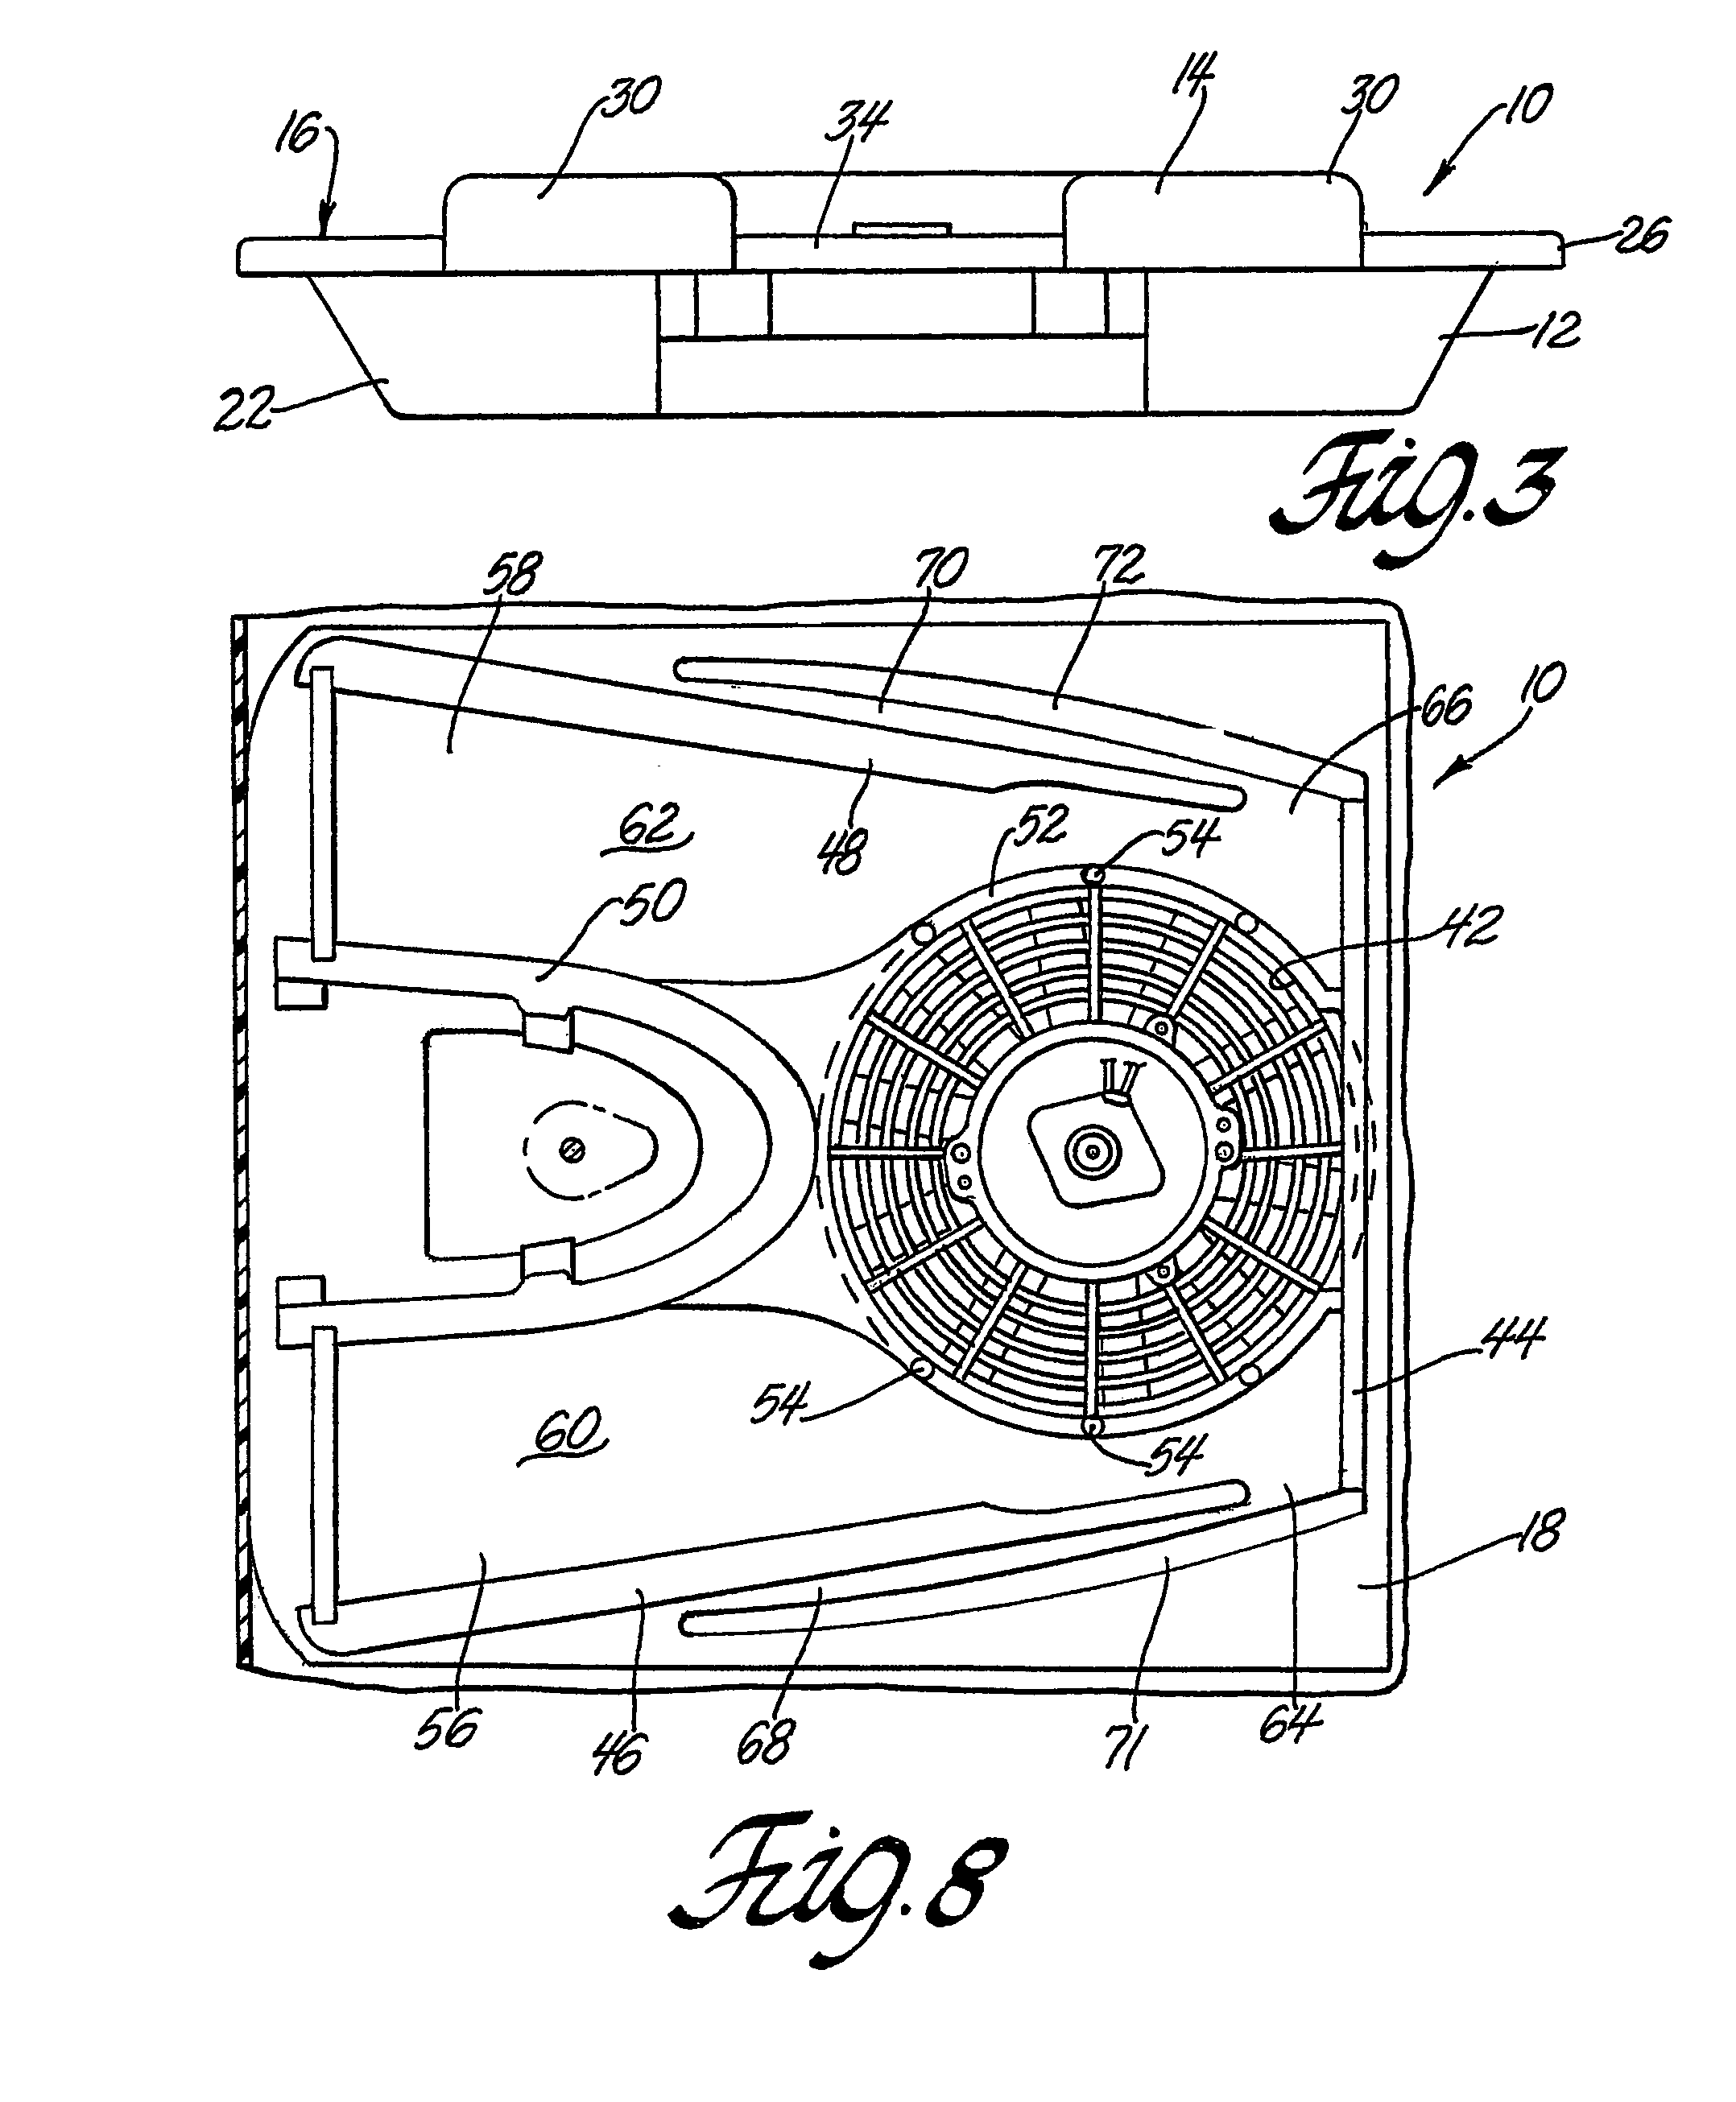 Vent assembly with single piece cover